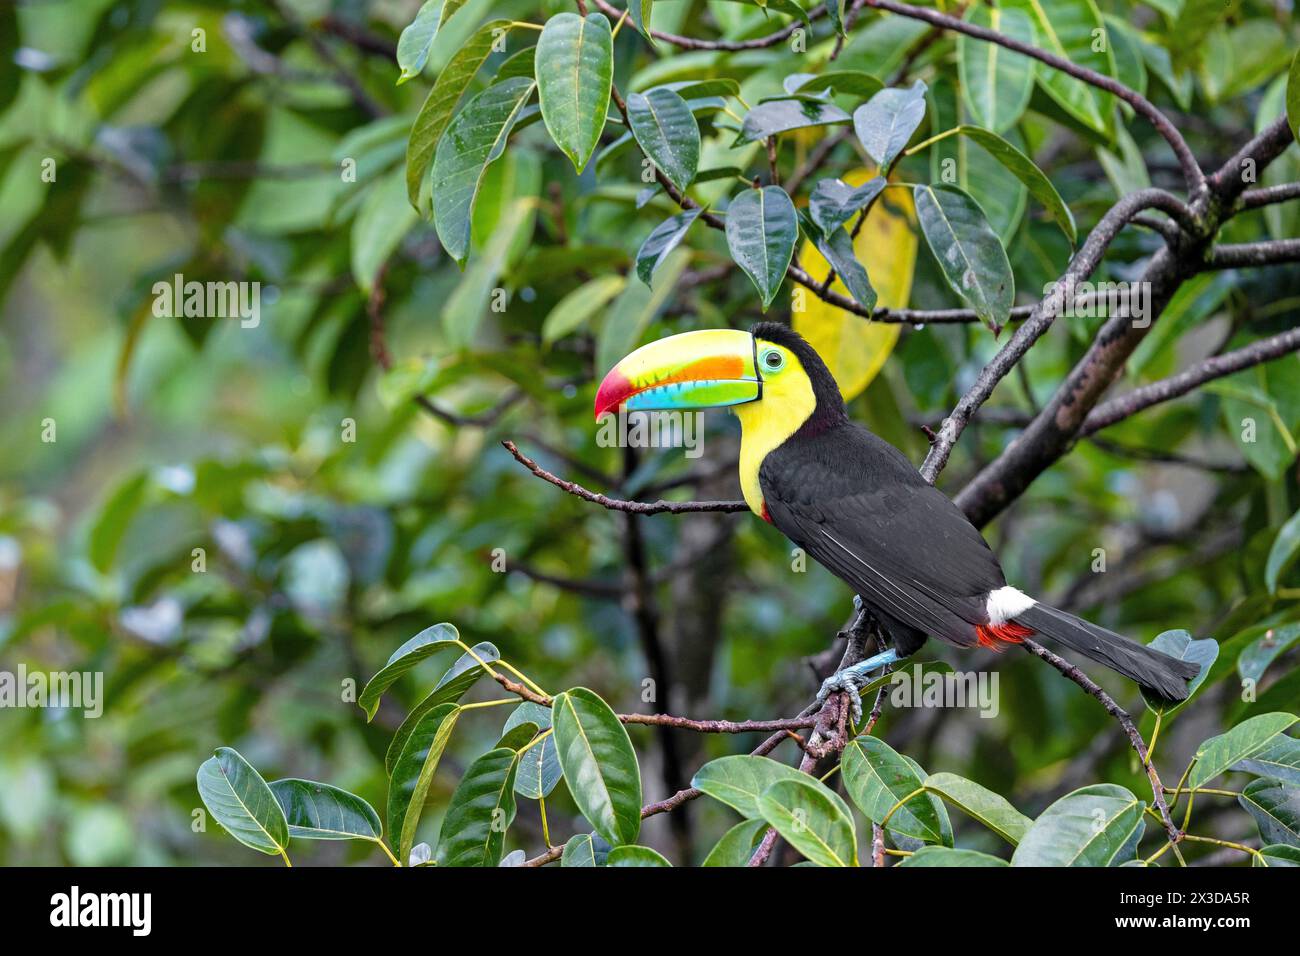 Keel-billed toucan, Sulfur-breasted toucan, Keel toucan, Rainbow-billed toucan (Ramphastos sulfuratus), sits on a branch in the rainforest, Costa Rica Stock Photo